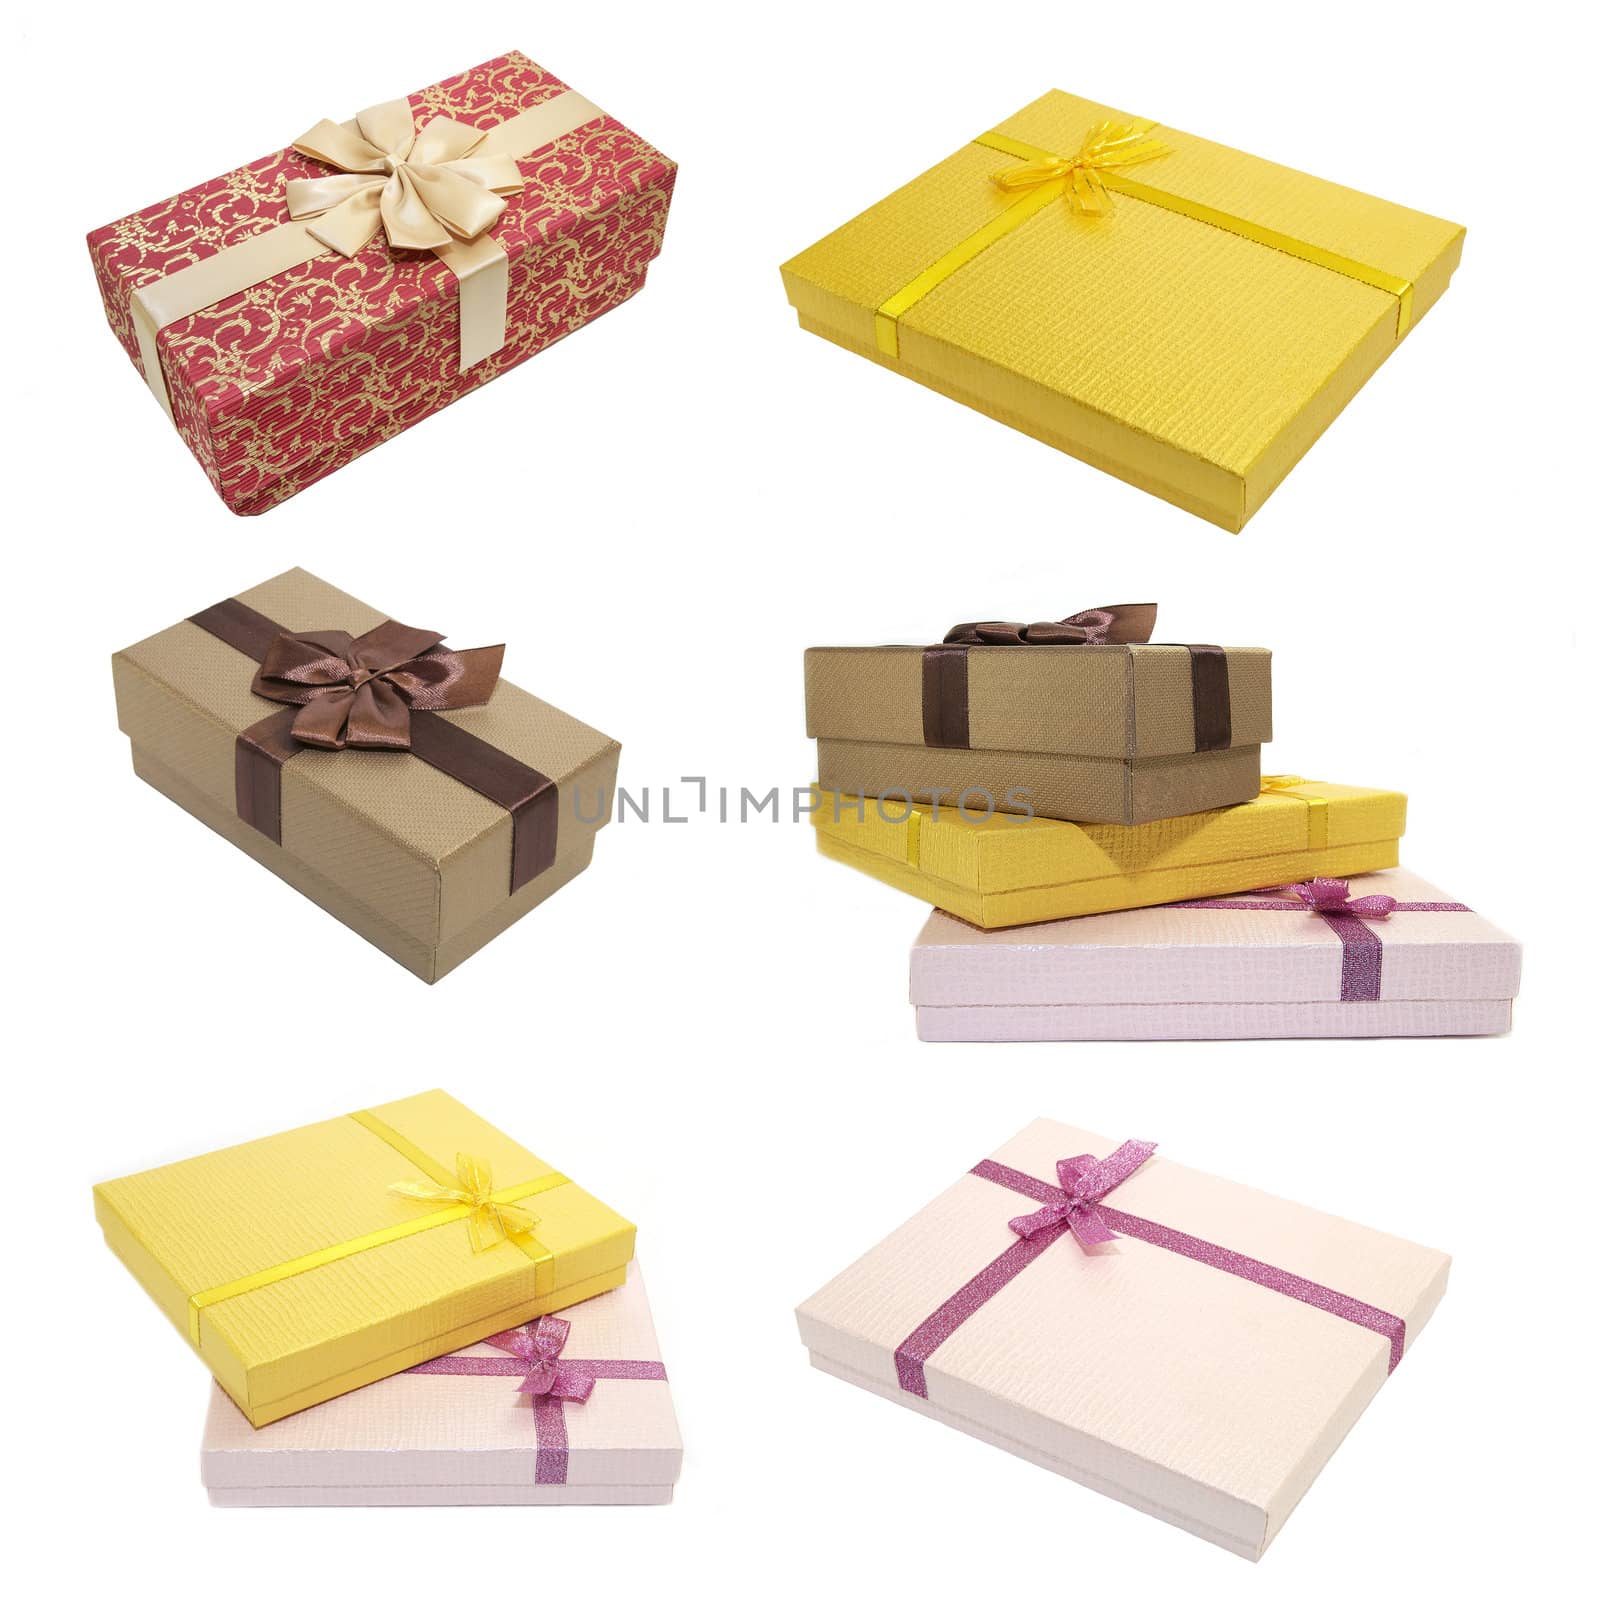 collection boxes for gifts by Lester120